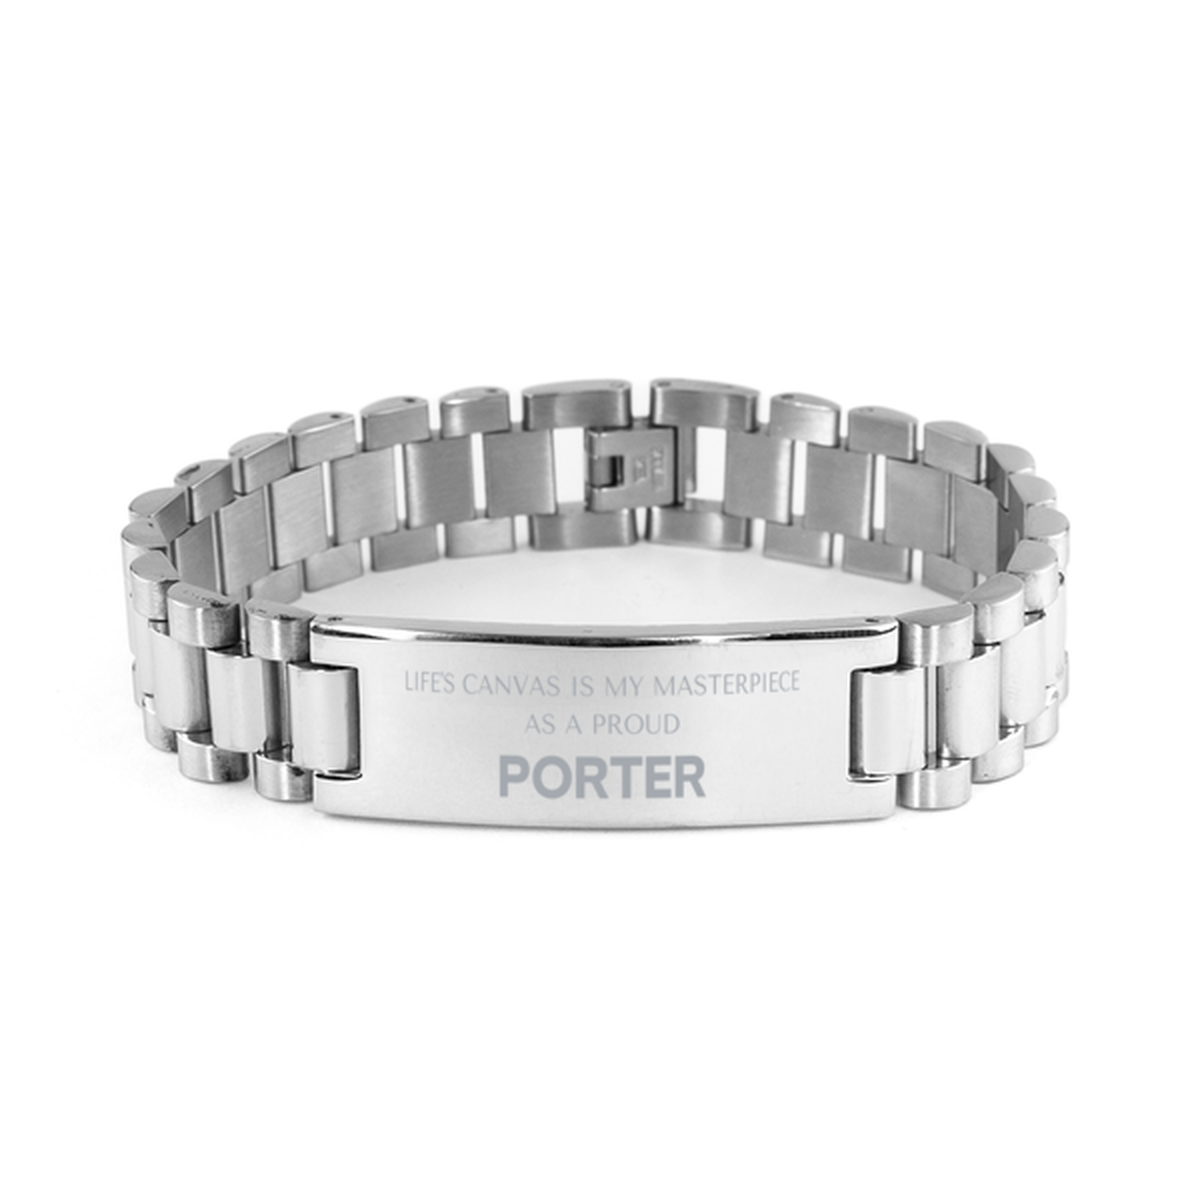 Proud Porter Gifts, Life's canvas is my masterpiece, Epic Birthday Christmas Unique Ladder Stainless Steel Bracelet For Porter, Coworkers, Men, Women, Friends